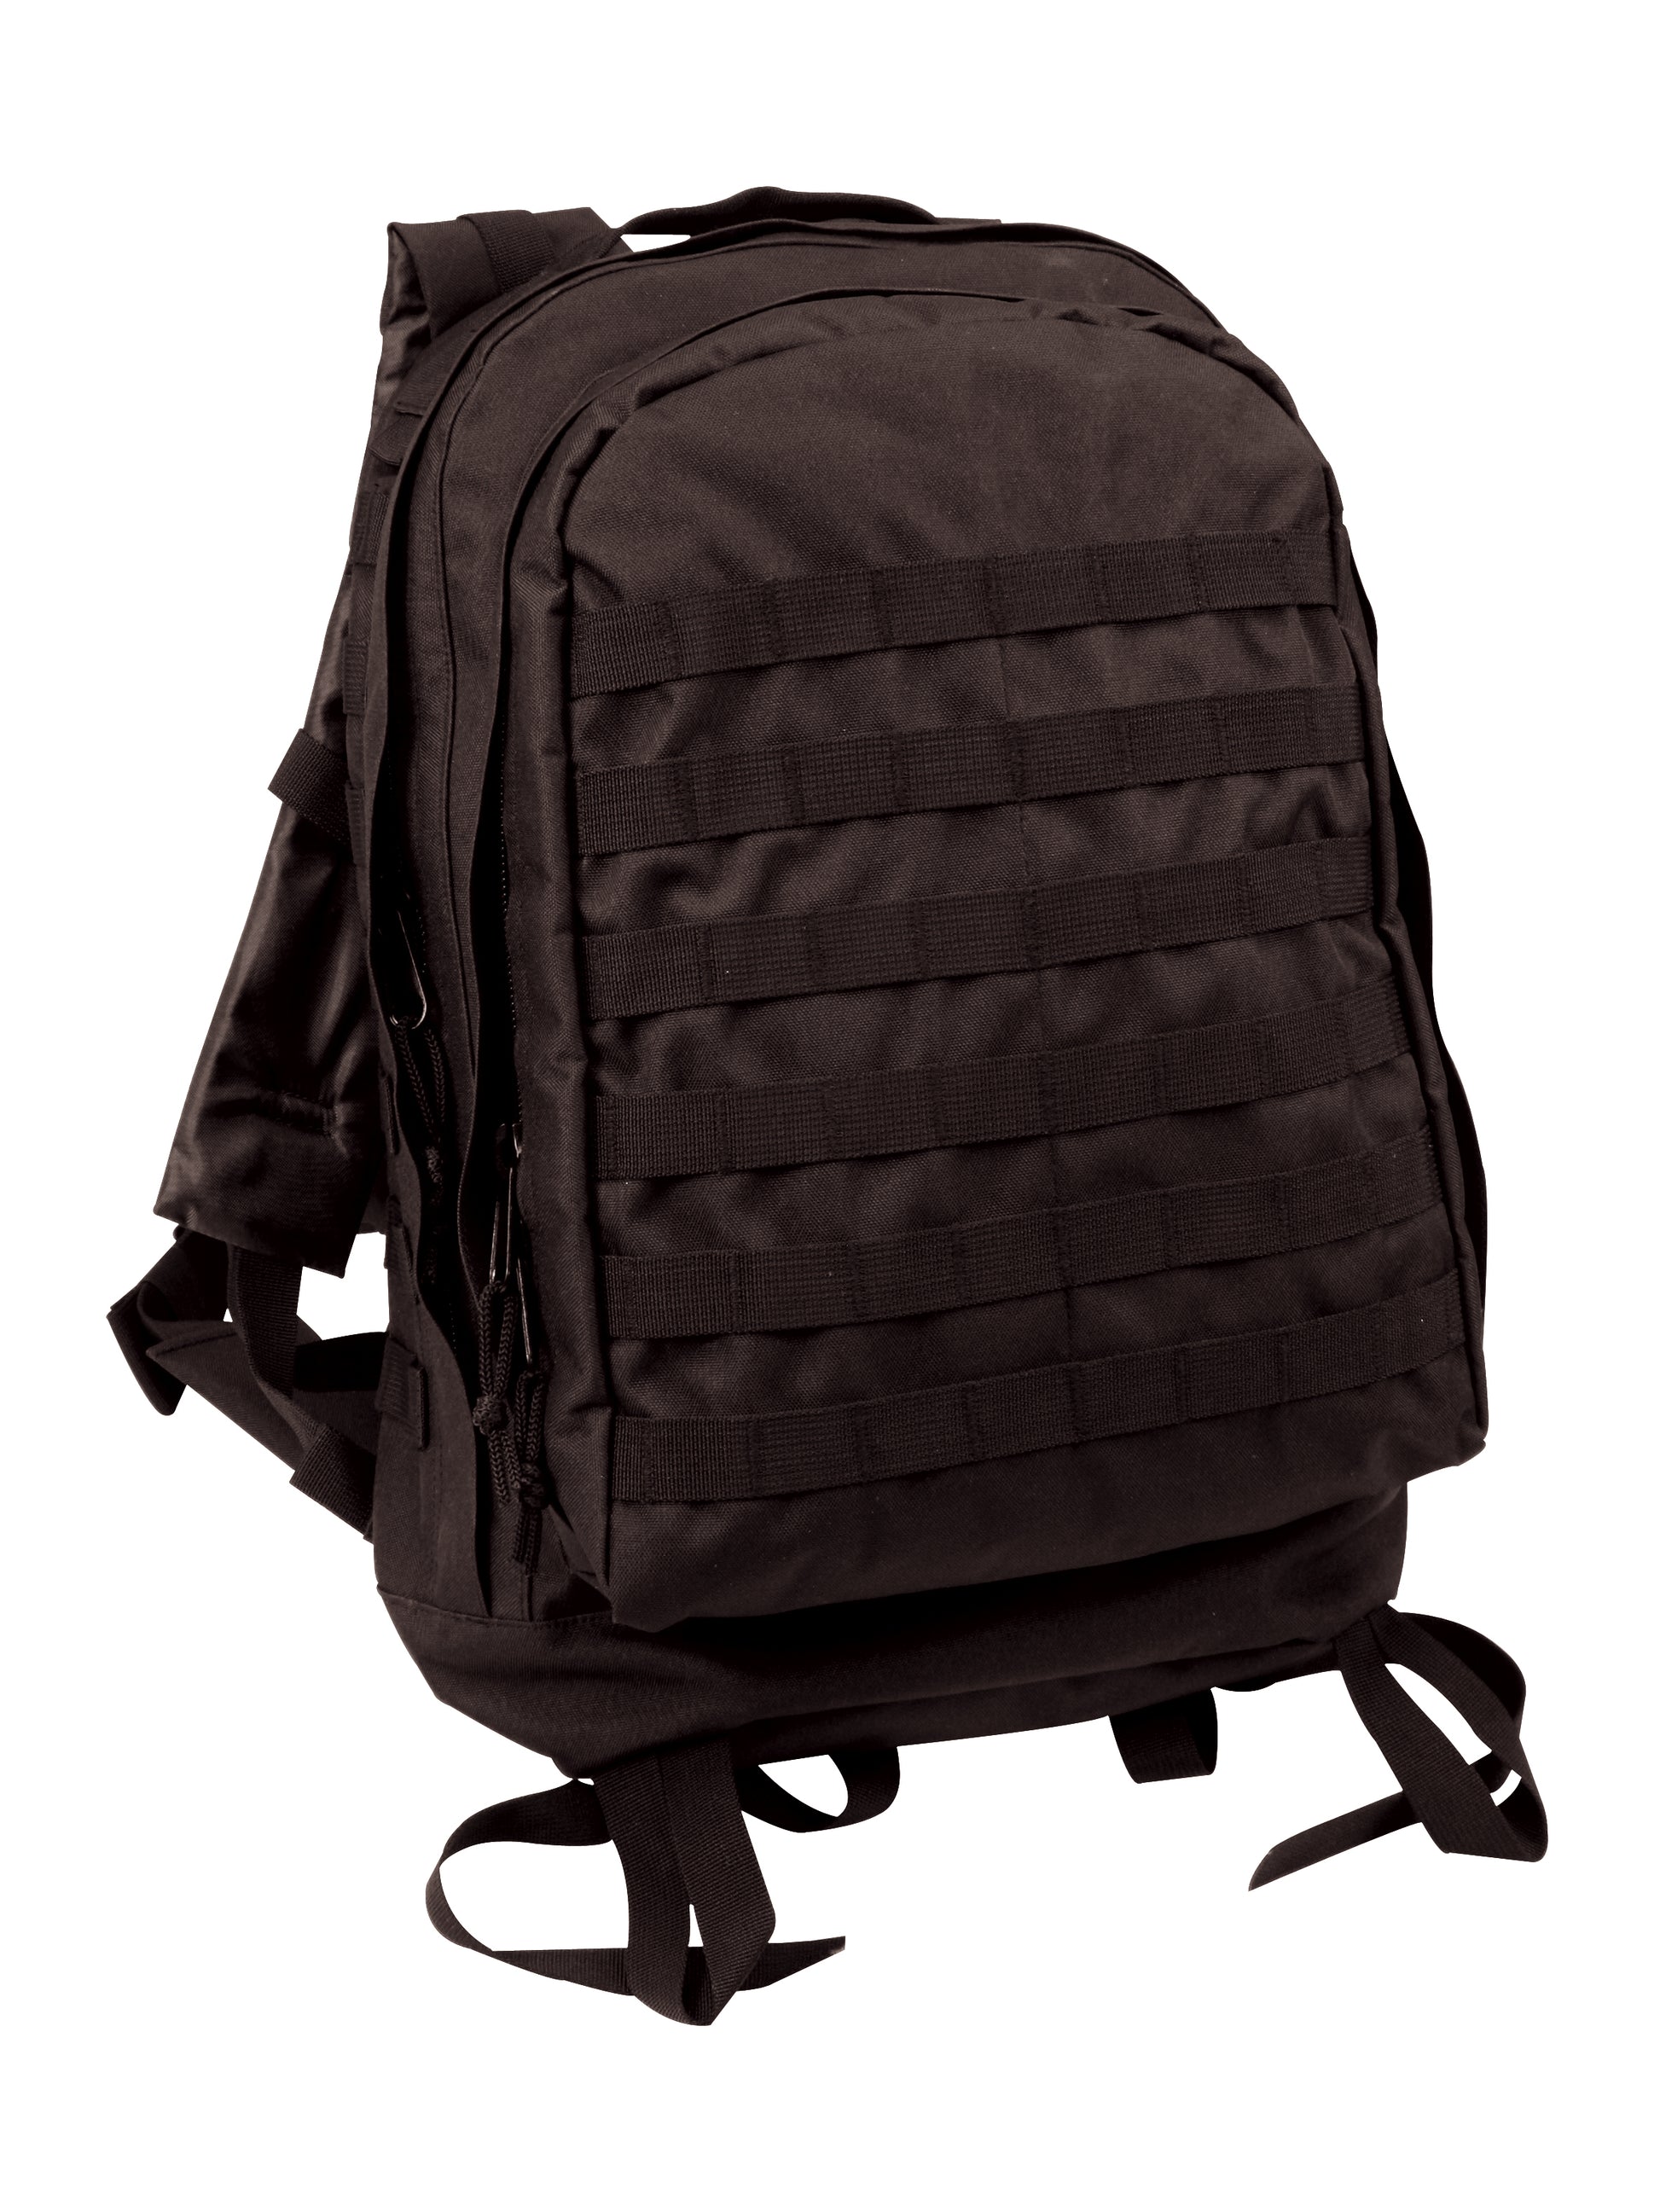 MOLLE II 3-Day Assault Pack - Tactical Choice Plus